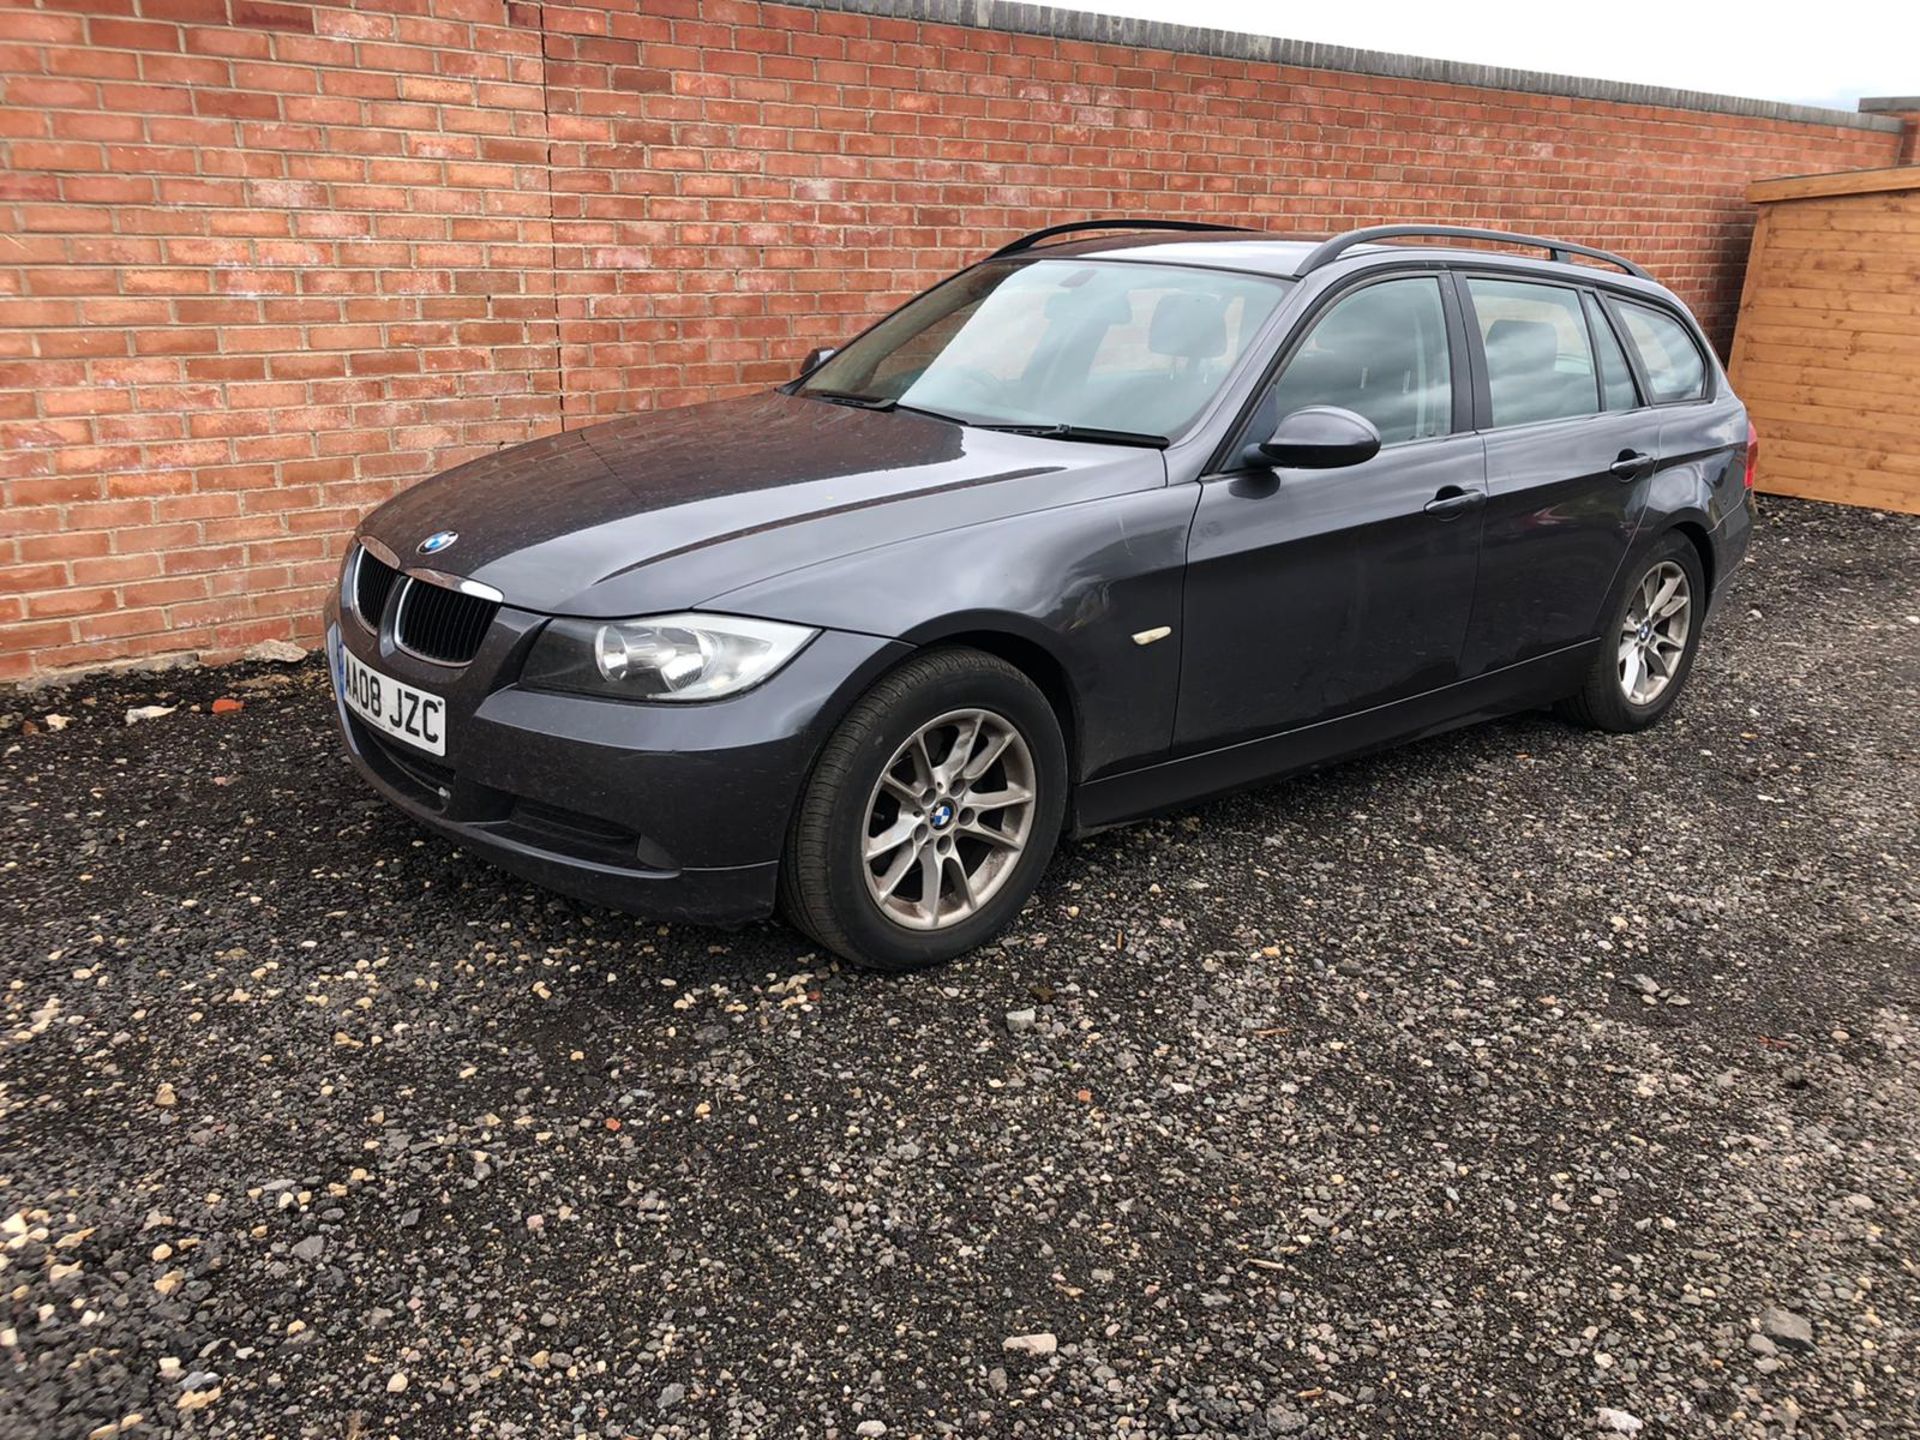 2008 BMW 318D EDITION ES TOURING GREY ESTATE, 2.0 DIESEL ENGINE, 6 PREVIOUS KEEPERS *NO VAT* - Image 2 of 11